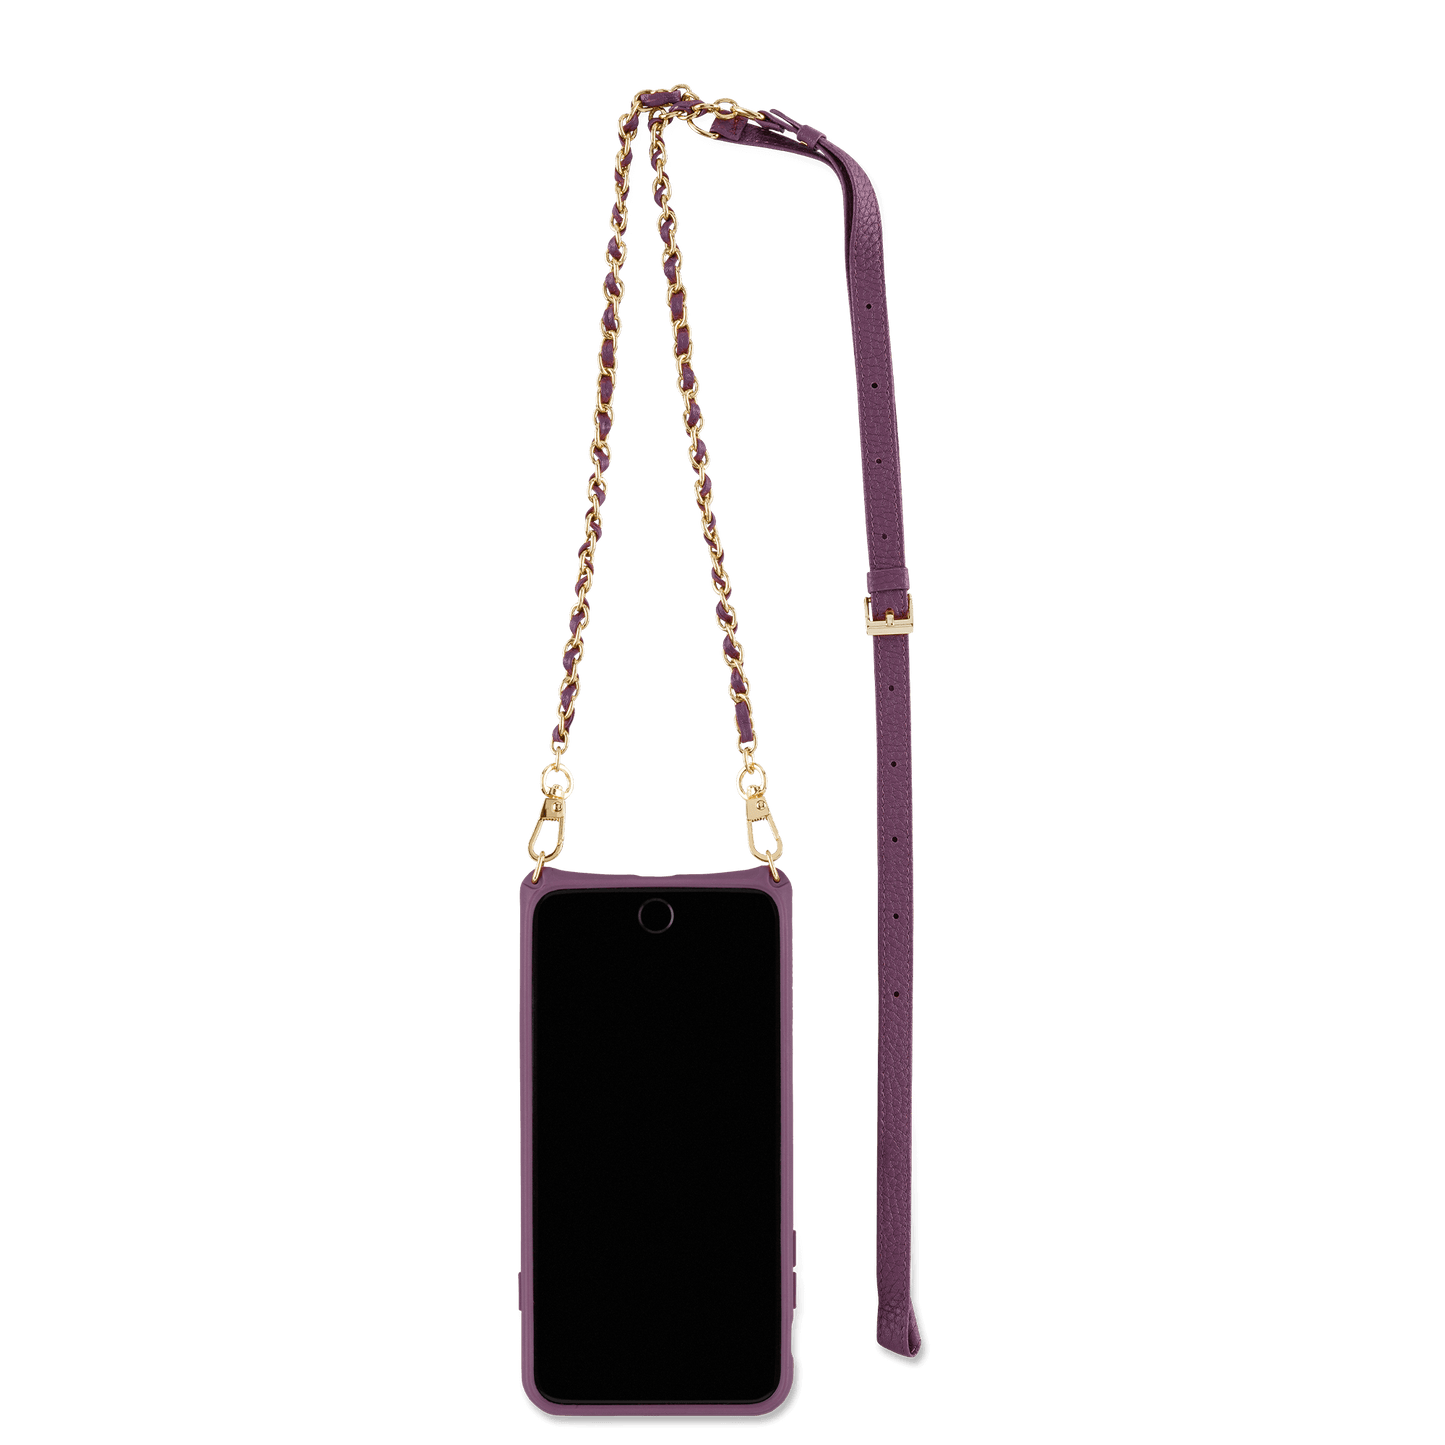 iPhone 8 Plus Chic Protective Sleeve